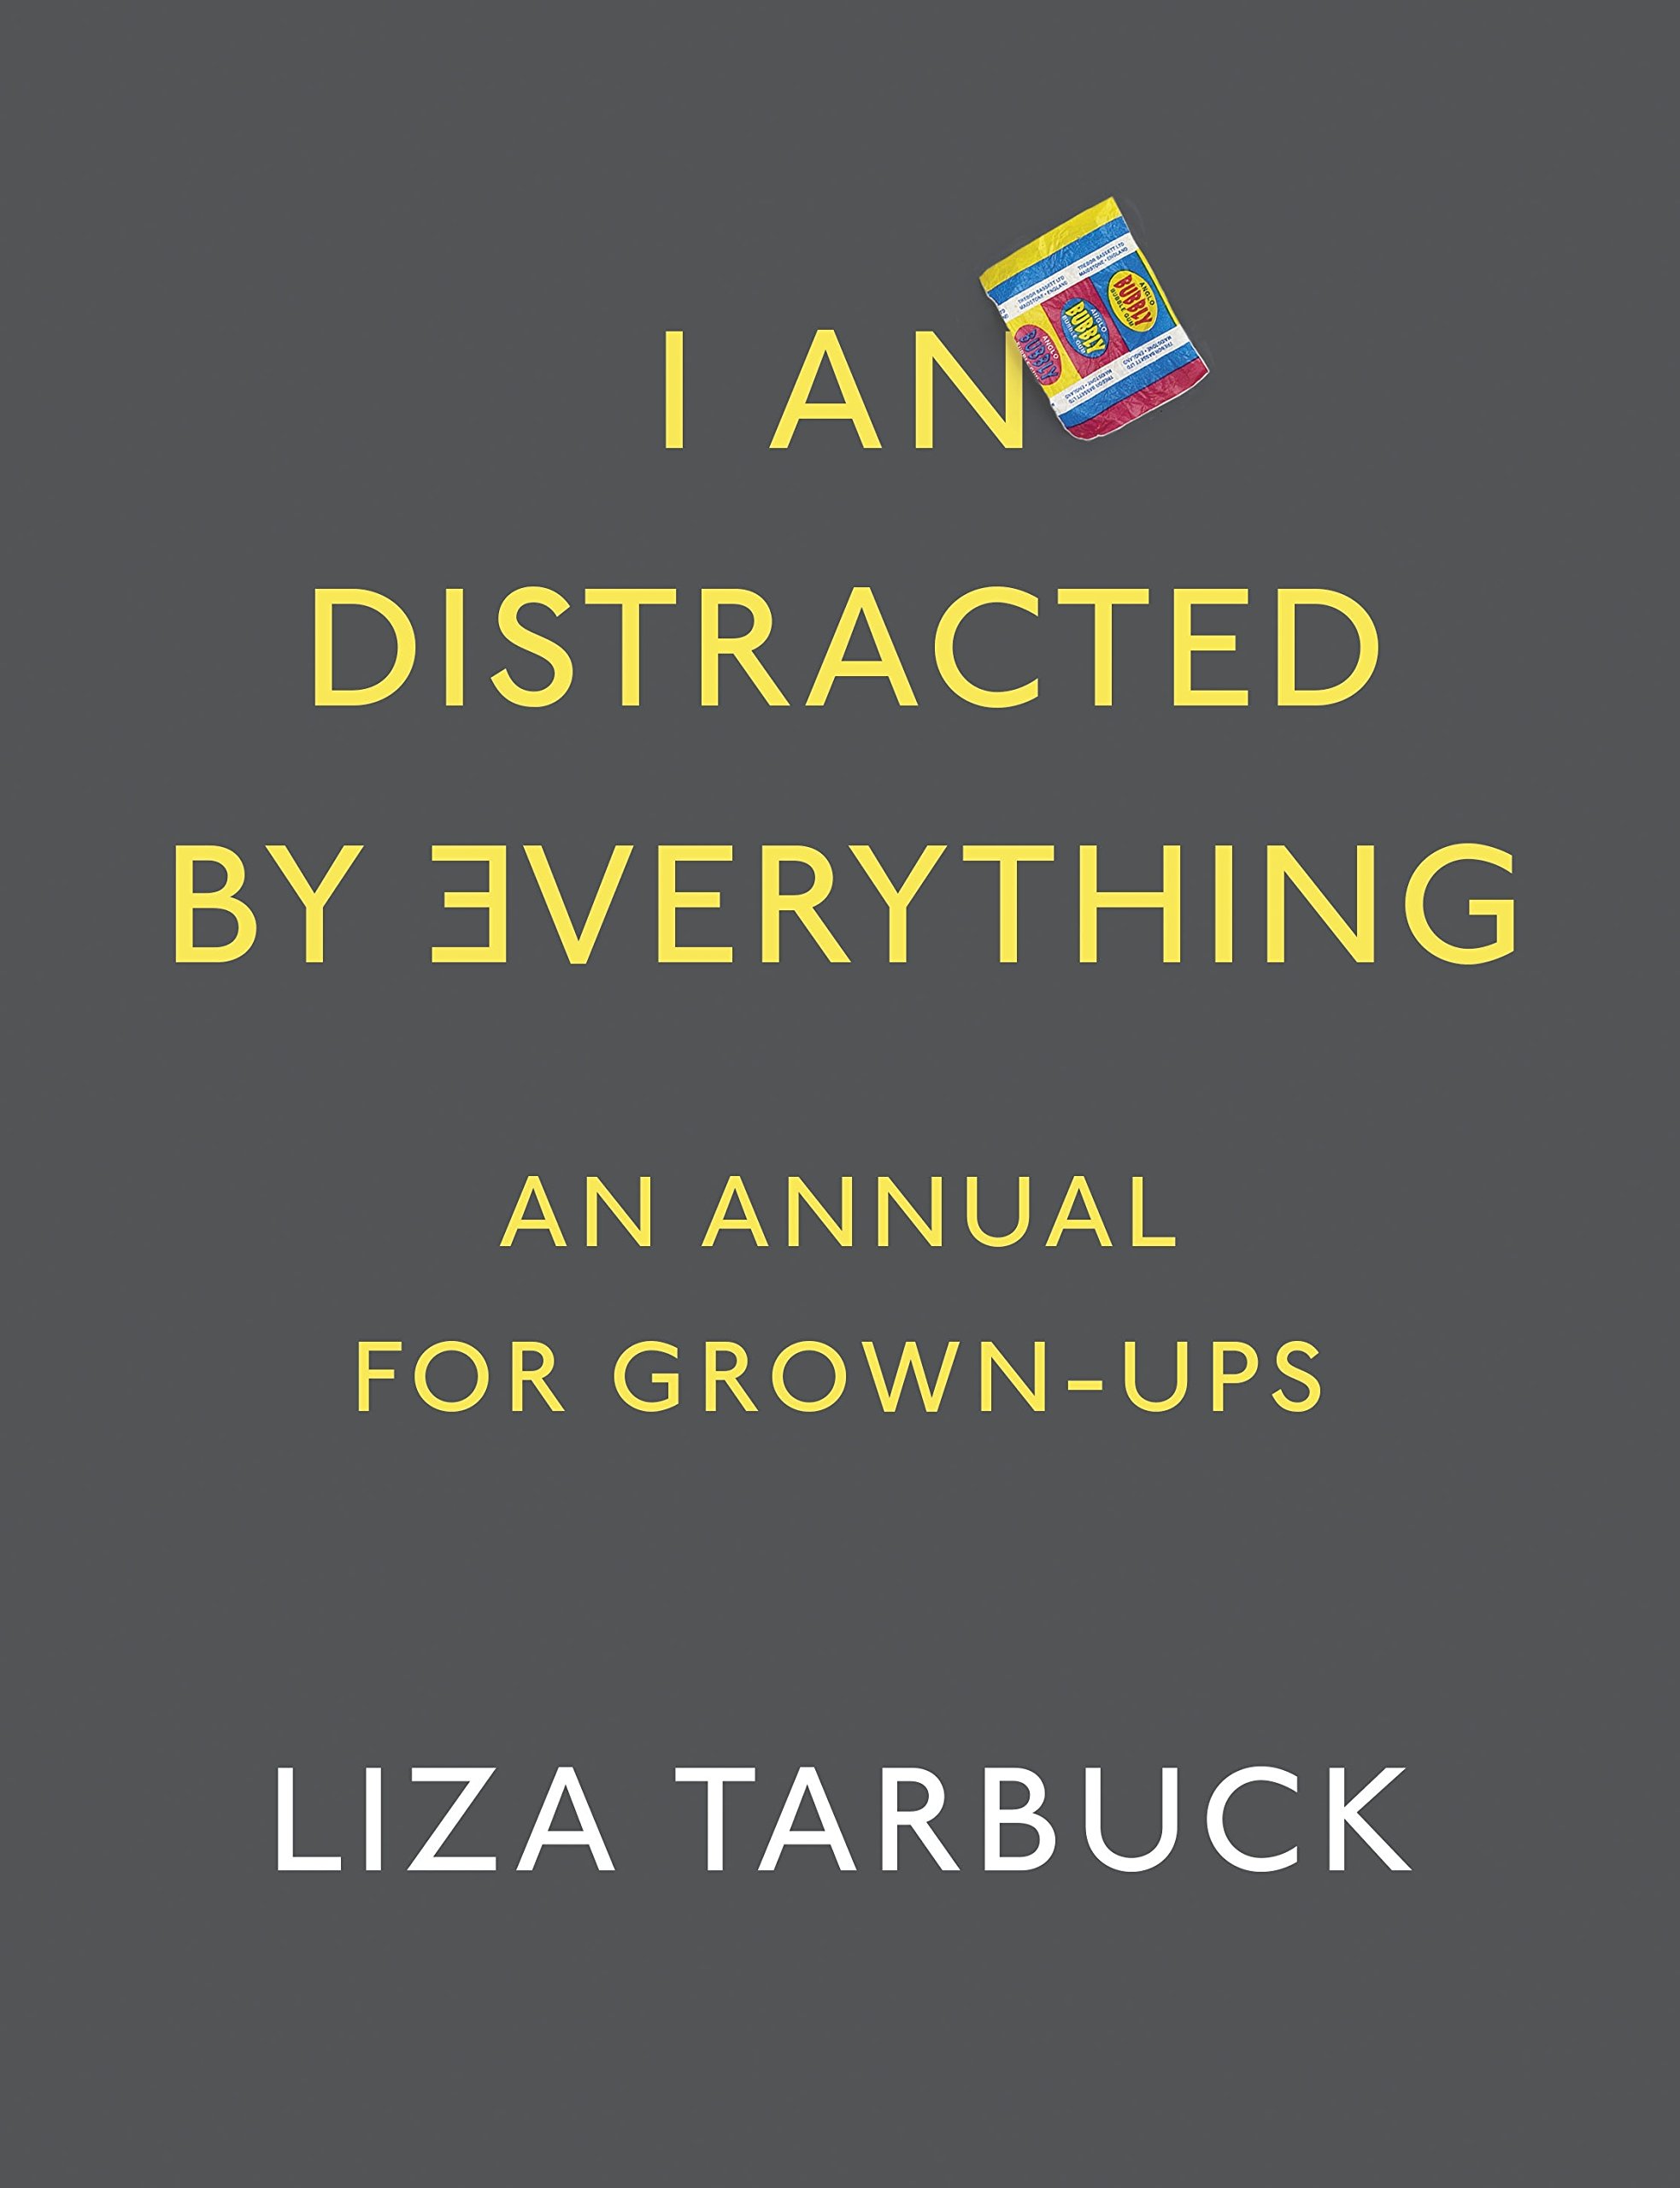 I An Distracted by Everything | Liza Tarbuck